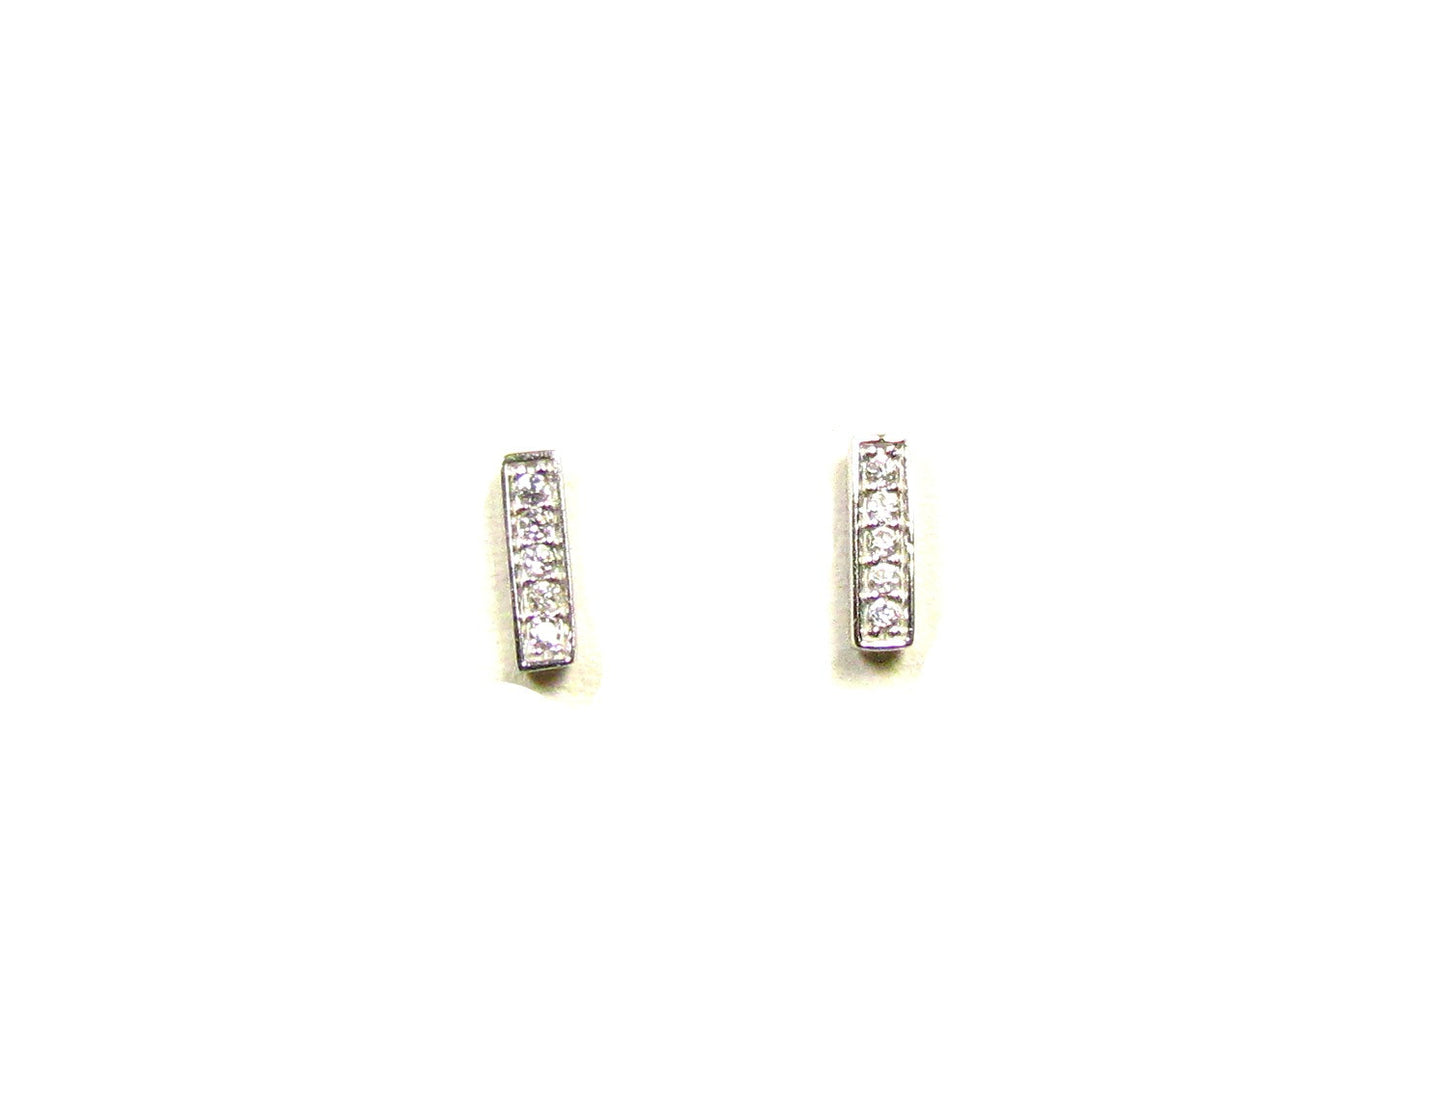 Tiny Bar Earrings with Cubic Zirconia